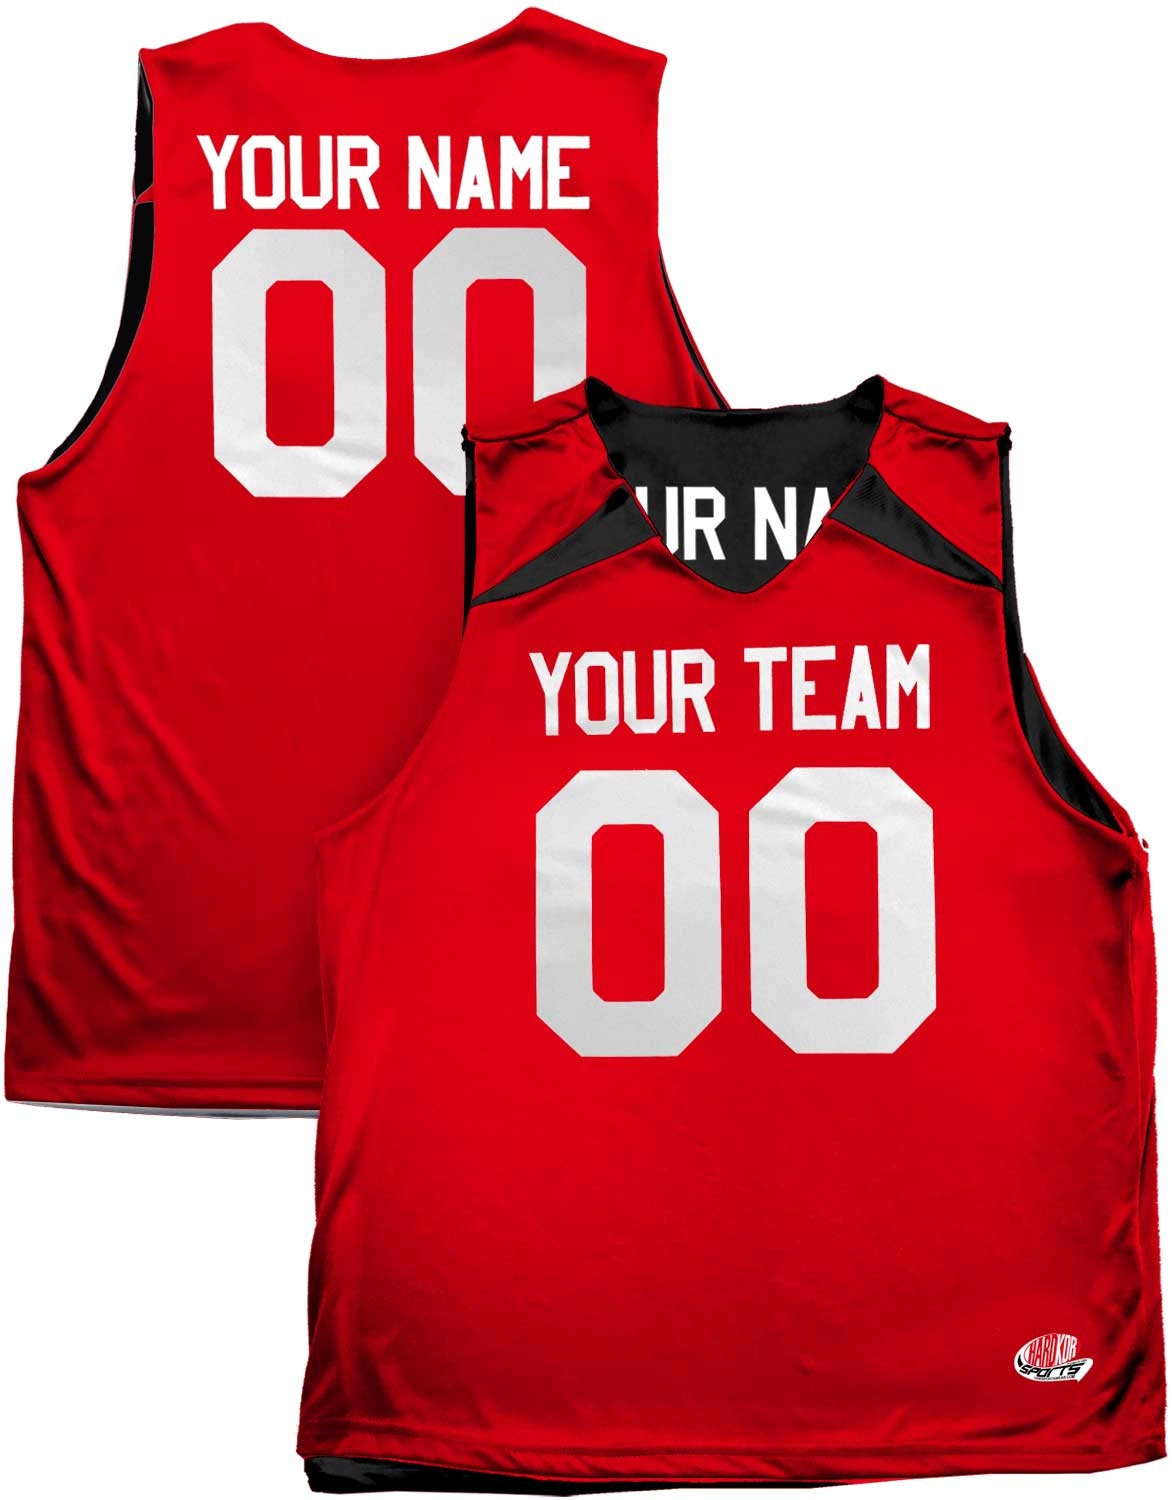 Red White and Blue Reversible Custom Basketball Uniform | Lightweight Shoulder Wedge Jersey with Team Name, Player Name and Numbers